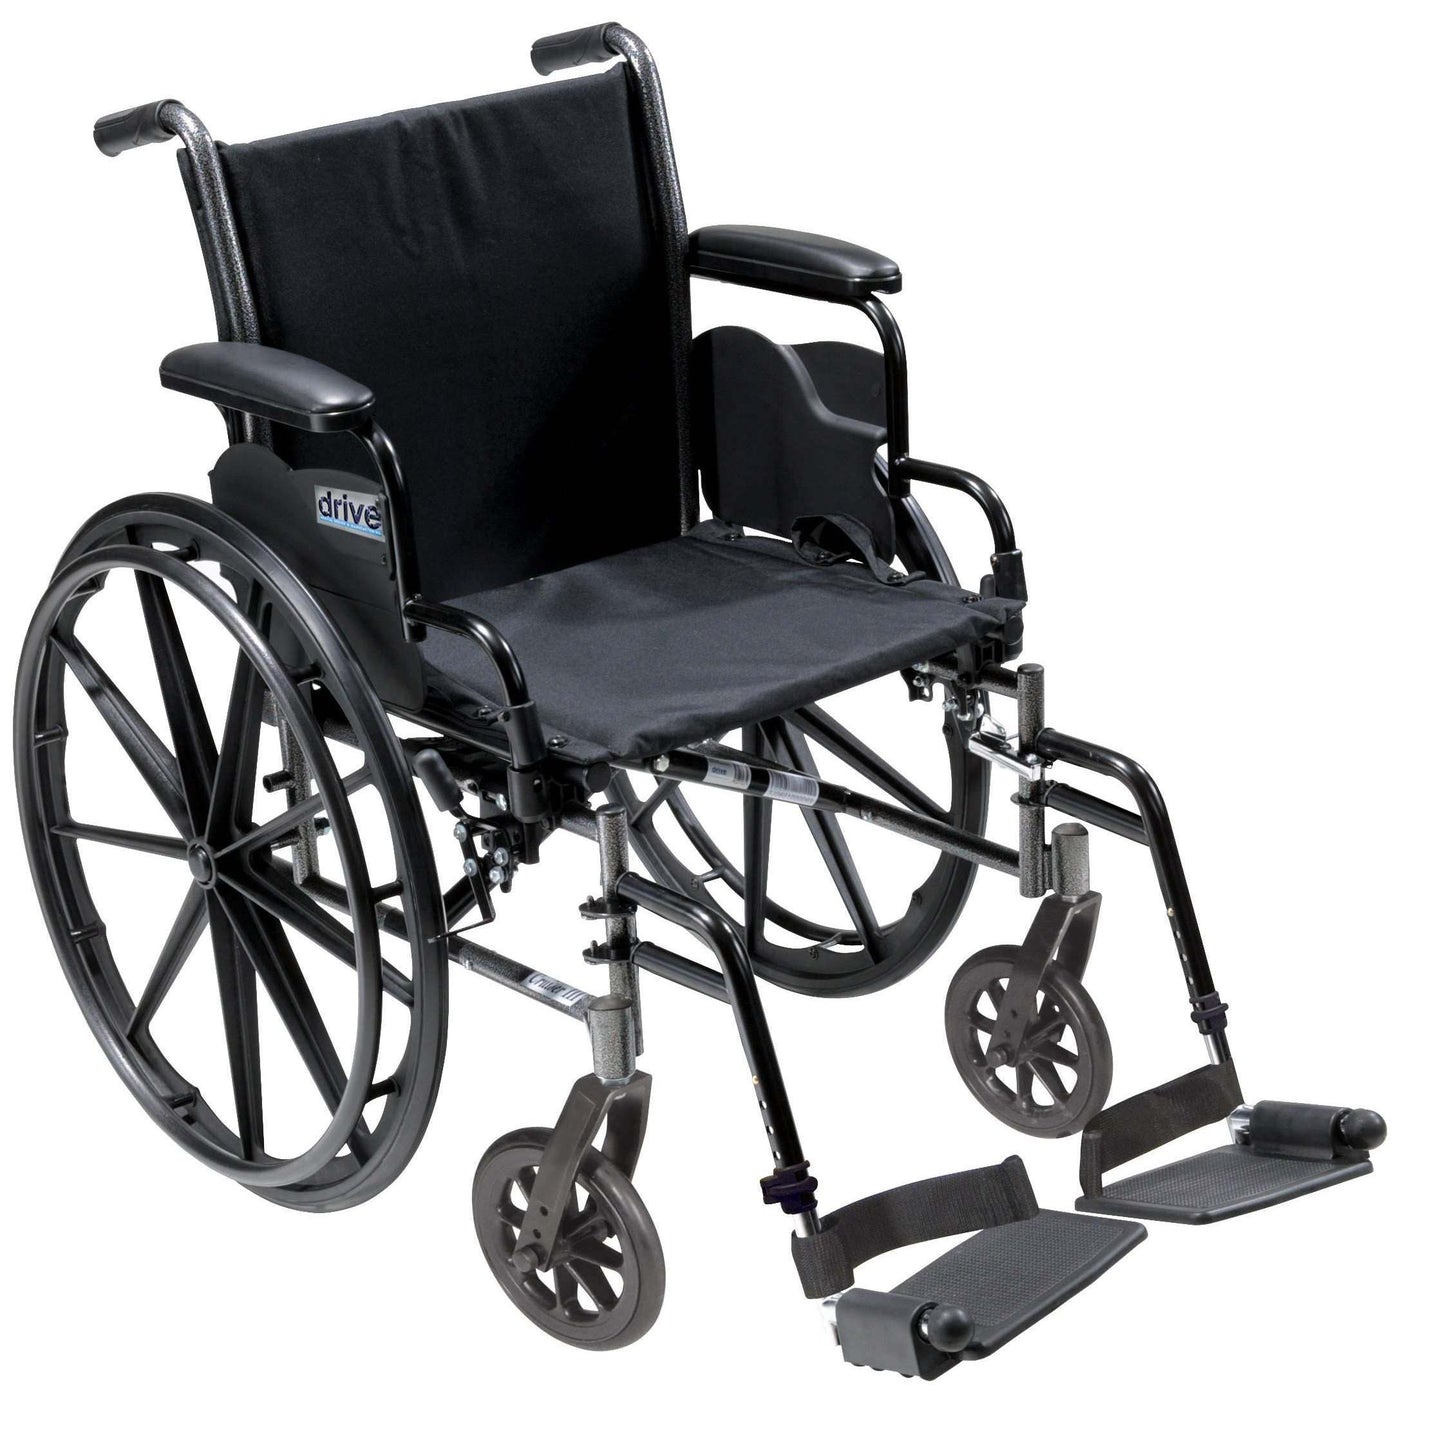 Drive k318dda-sf Cruiser III Light Weight Wheelchair with Flip Back Removable Arms, Desk Arms, Swing away Footrests, 18" Seat